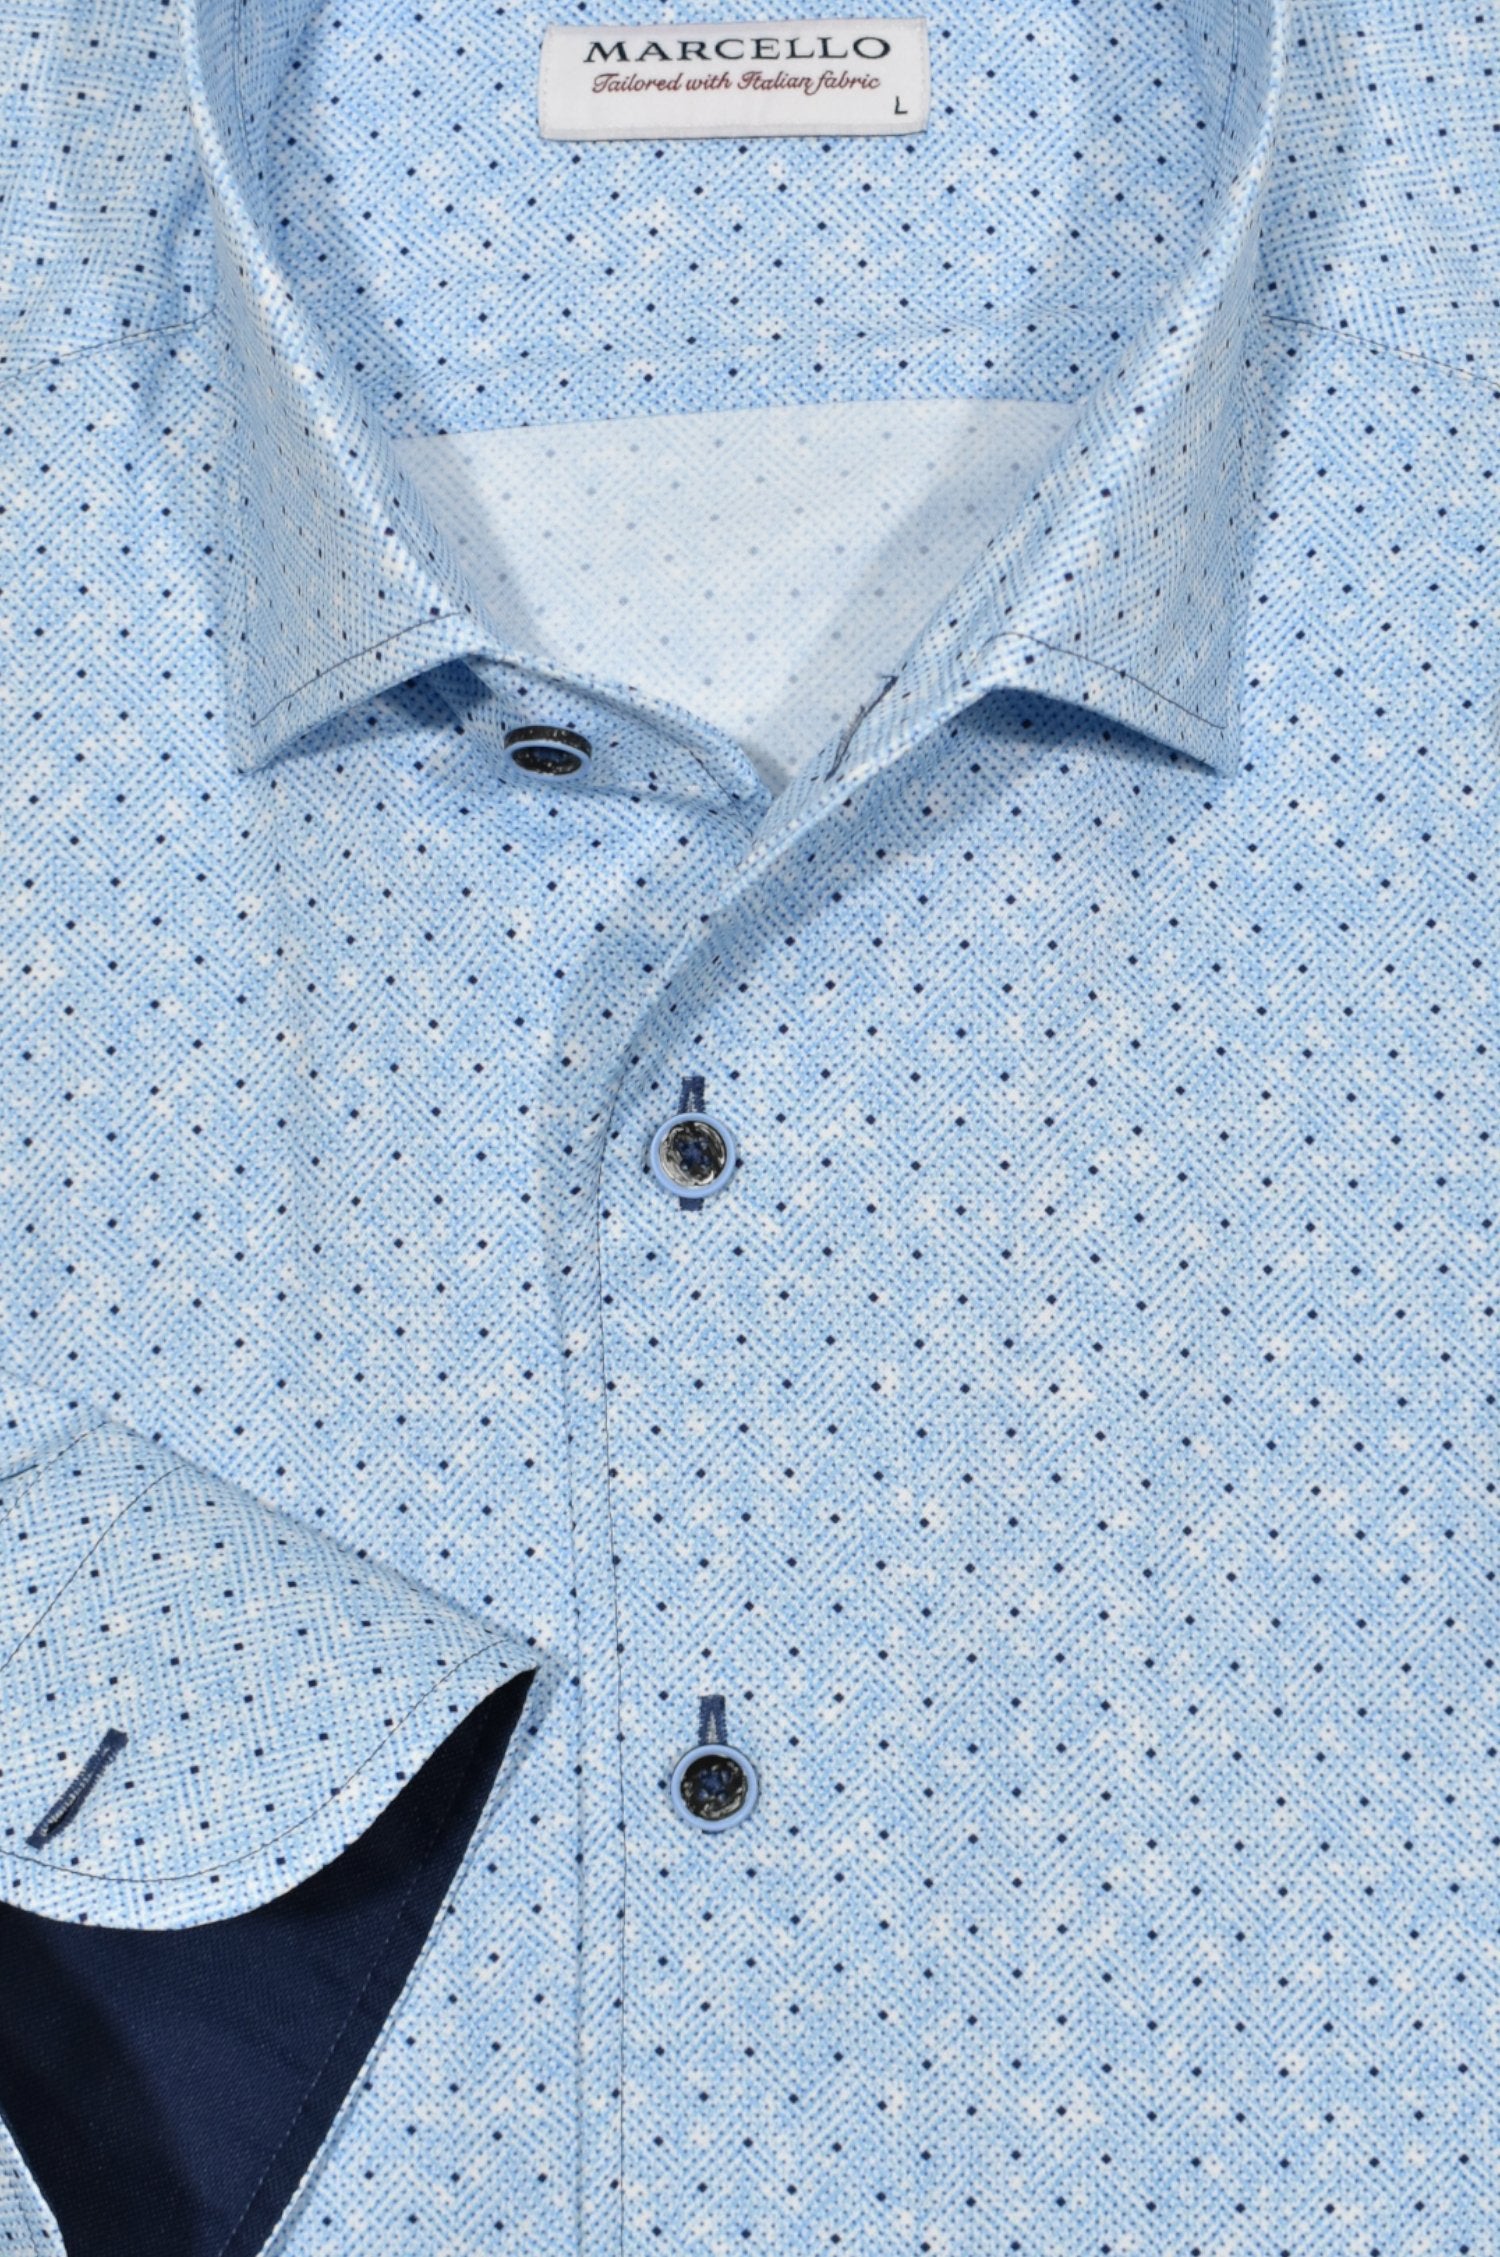 Elevate your style with the W932R Sky Dot Roll Collar. Featuring a Marcello exclusive one piece roll collar, this medium blue patterned herringbone shirt is accented with random navy dots. Exude confidence and sophistication with this must-have piece. By Marcello